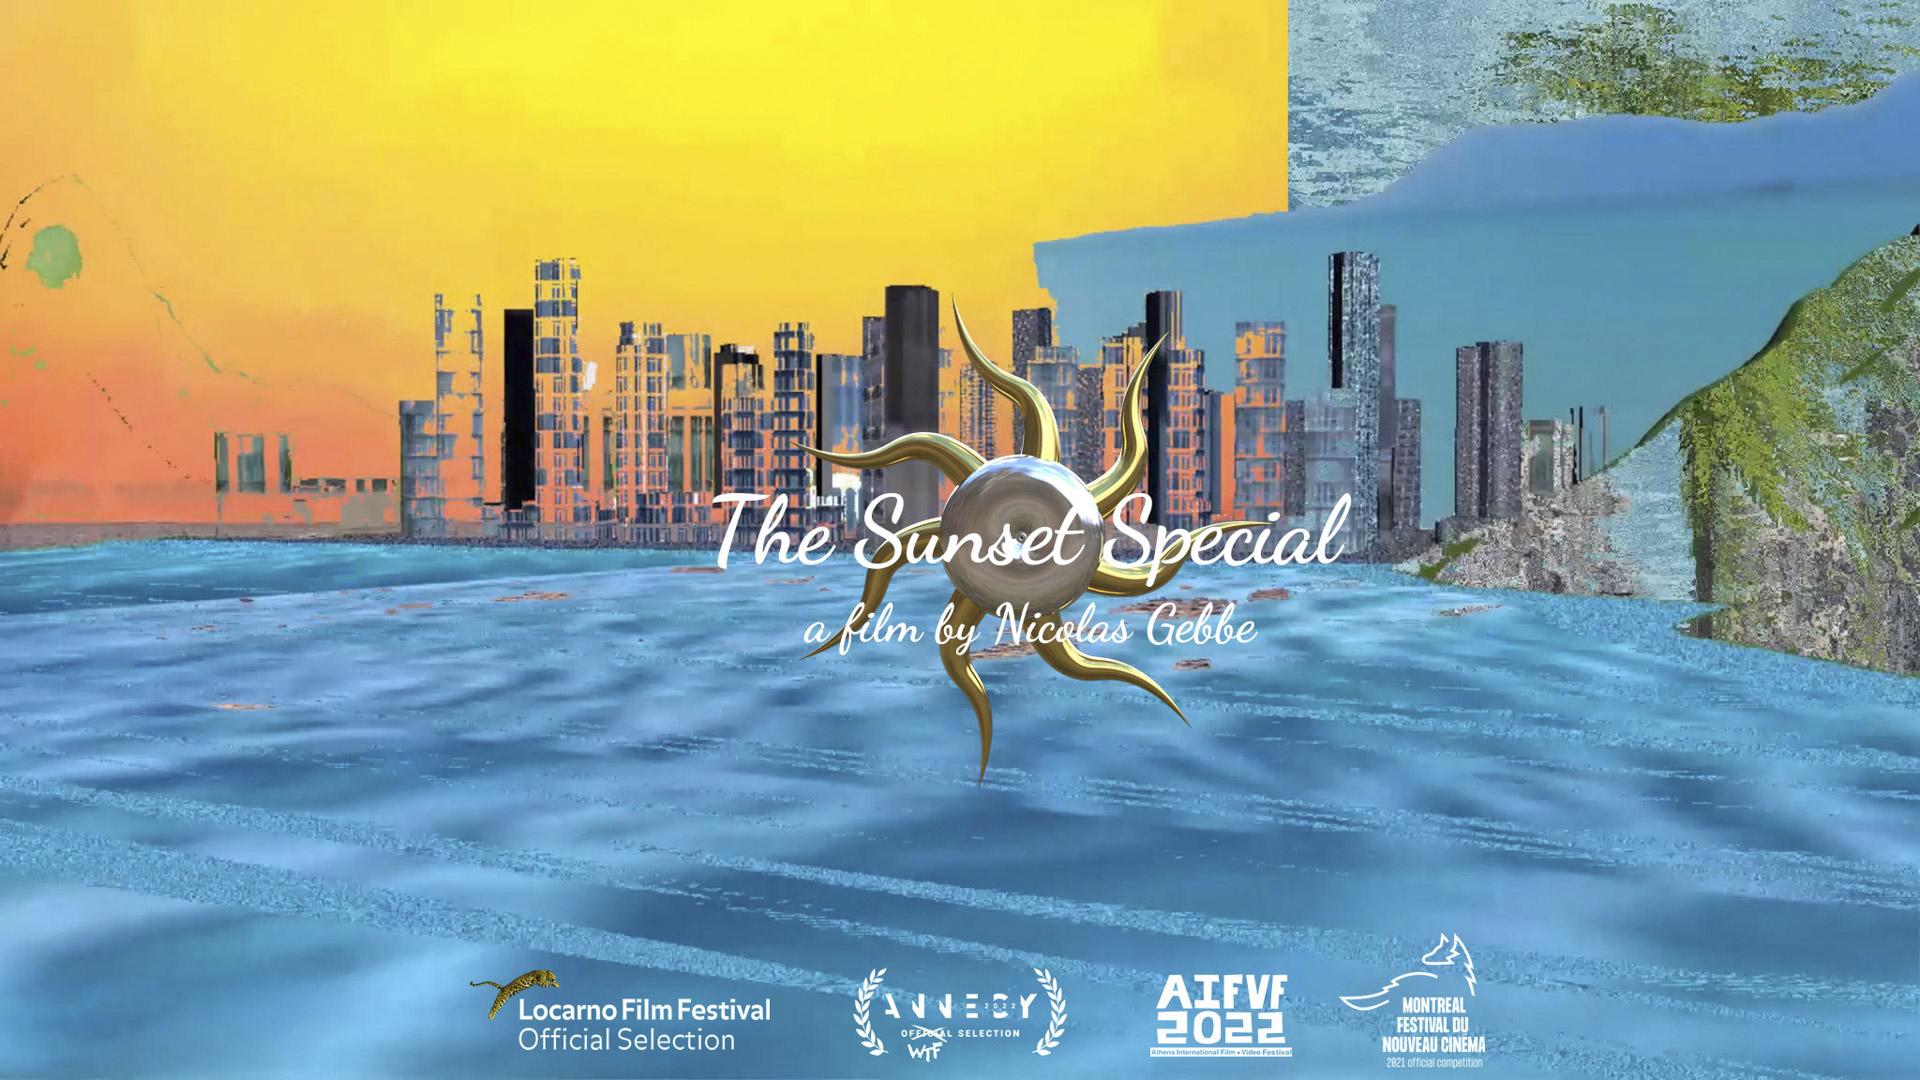 The Sunset Special